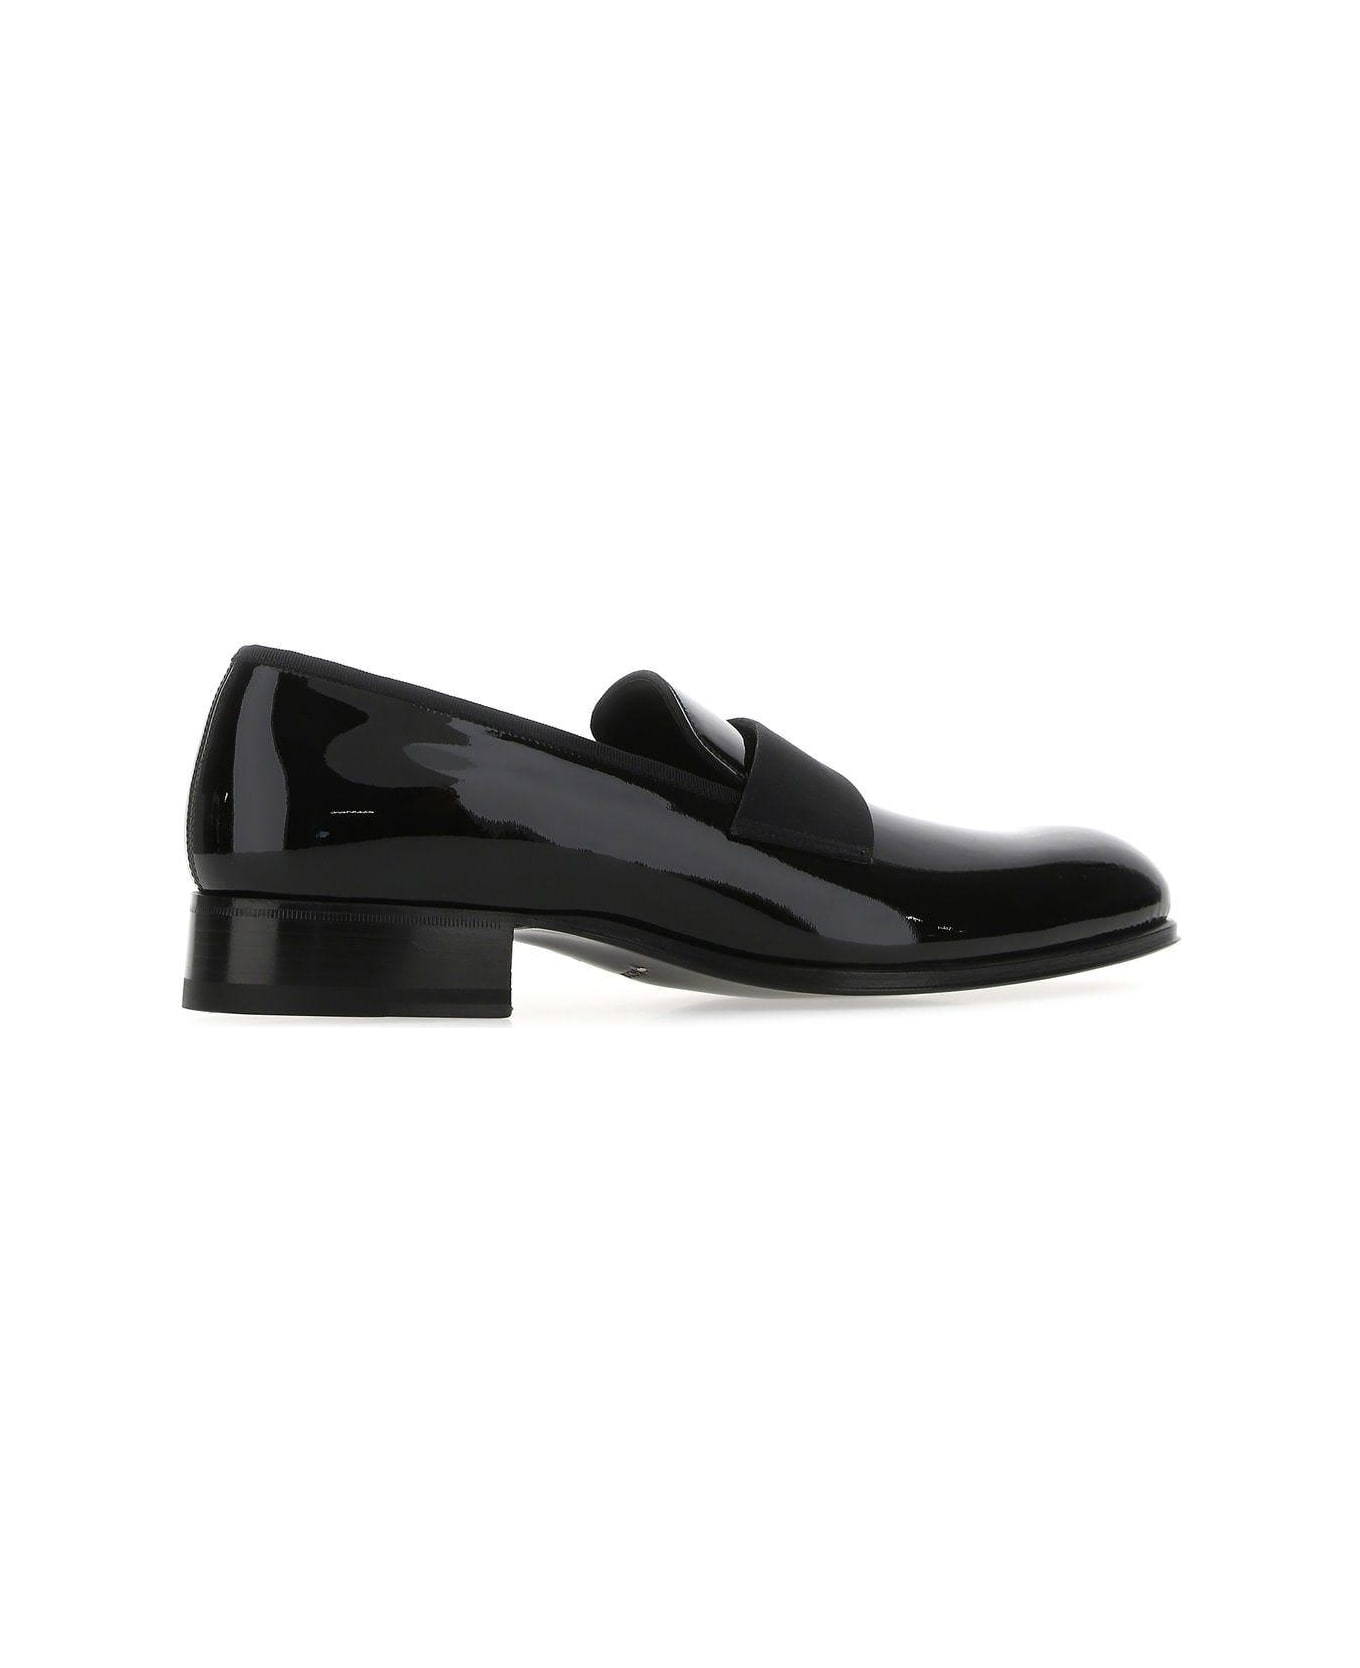 Tom Ford Black Leather Loafers - 1N001